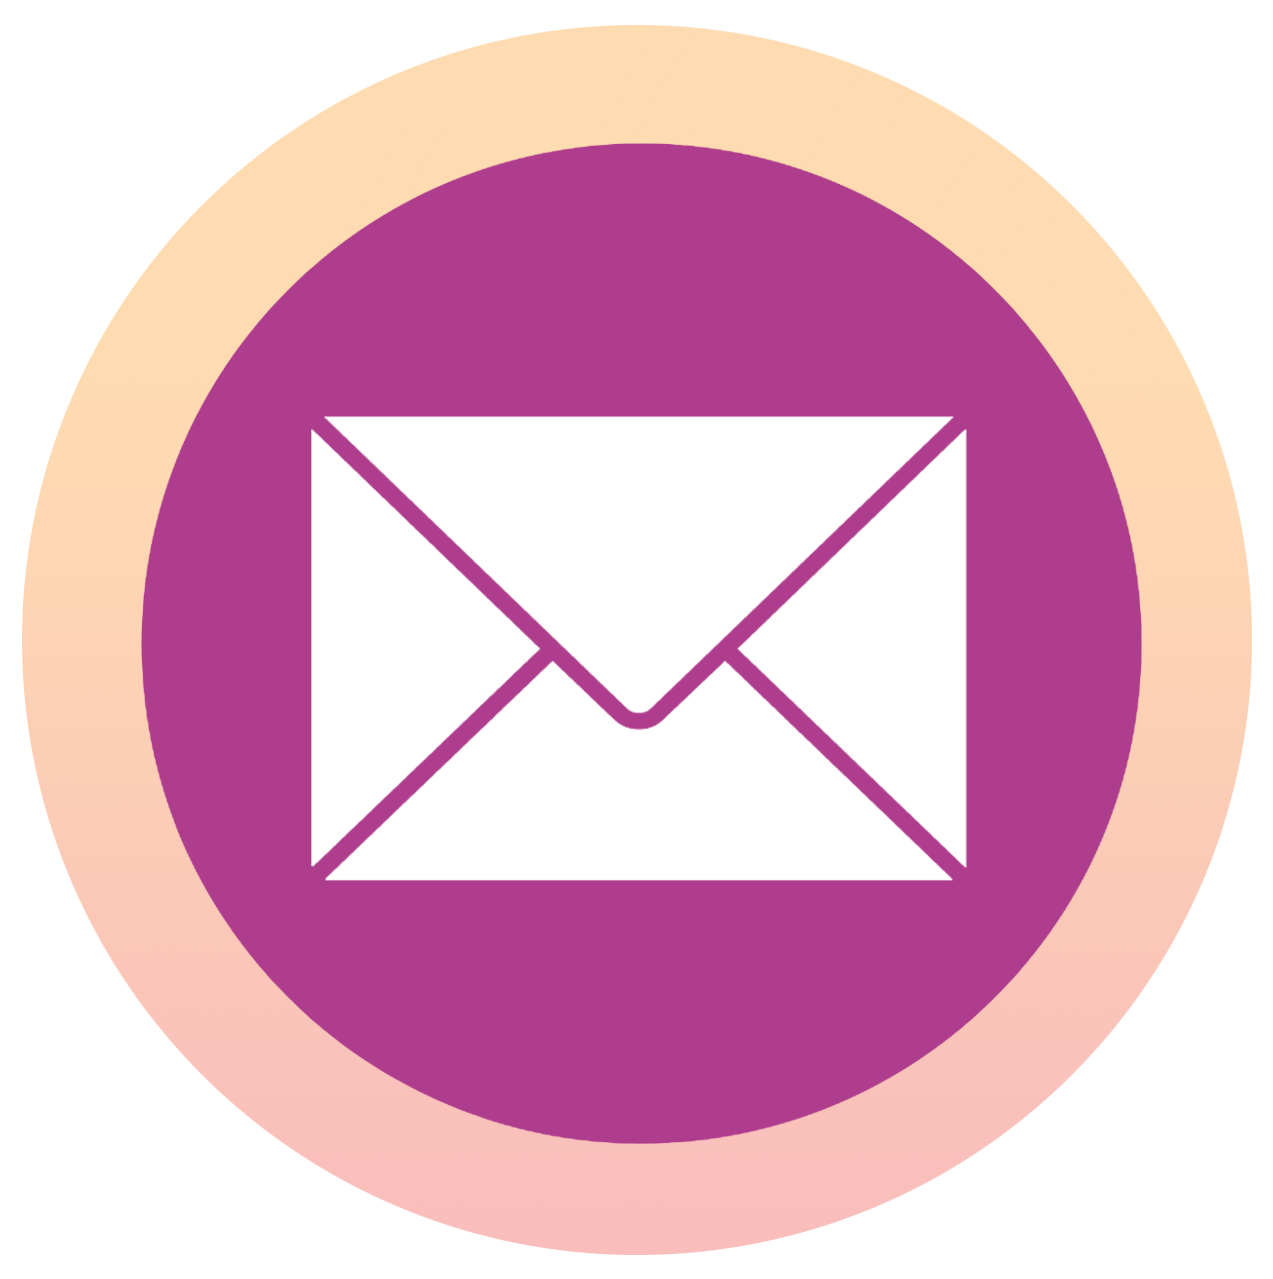 An email icon in a purple and orange circle.